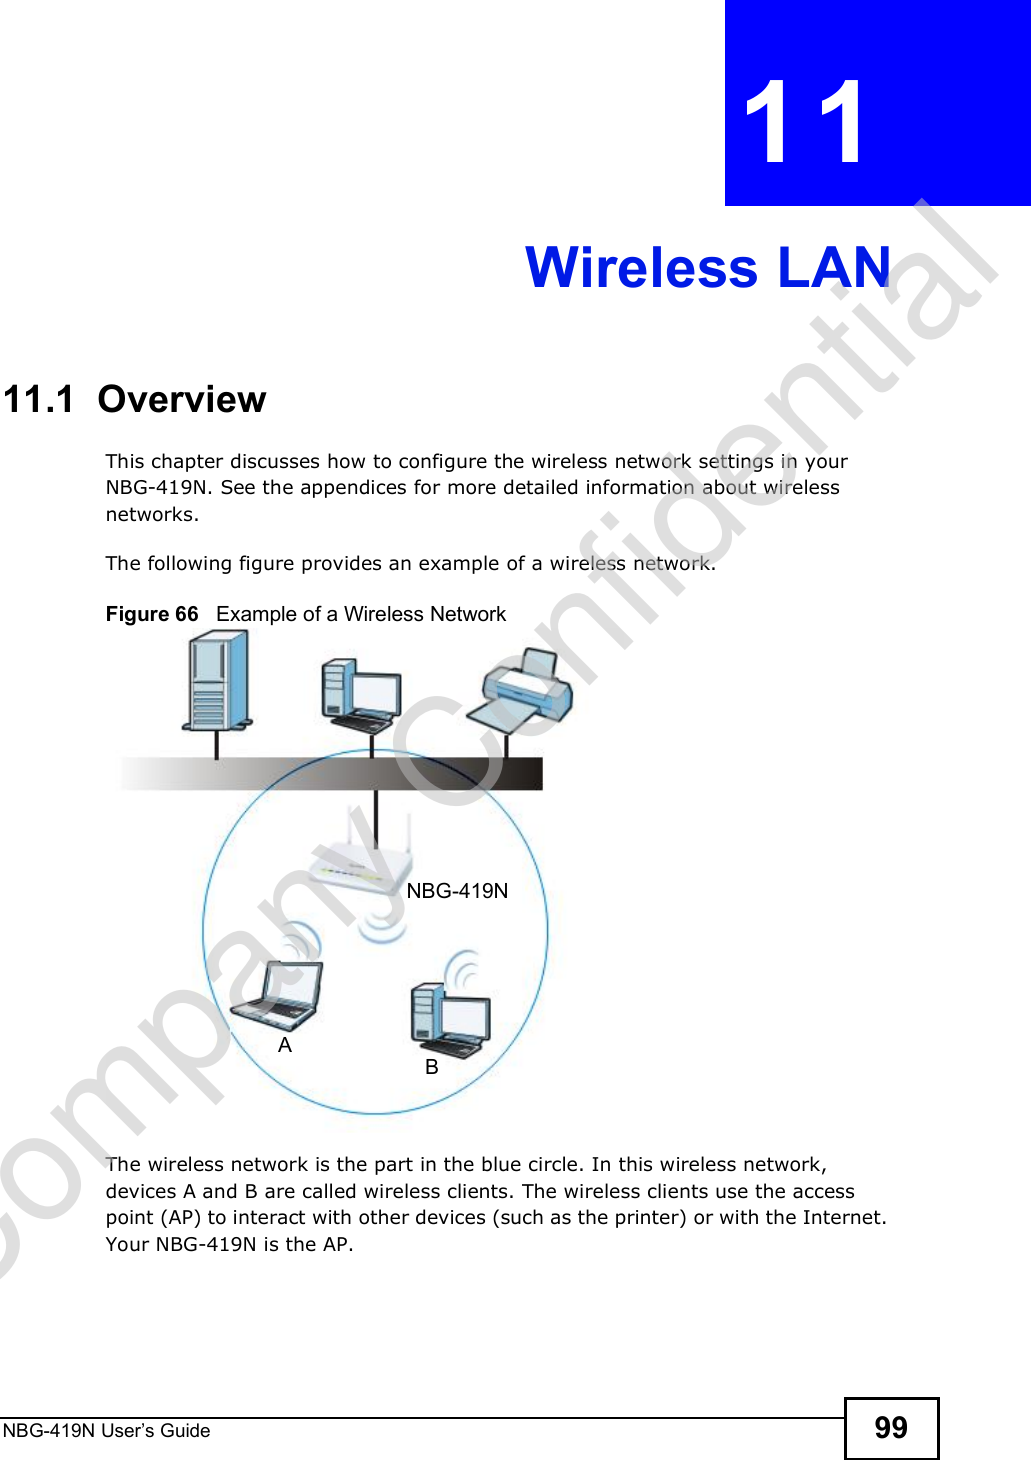 NBG-419N User s Guide 99CHAPTER  11 Wireless LAN11.1  OverviewThis chapter discusses how to configure the wireless network settings in your NBG-419N. See the appendices for more detailed information about wireless networks.The following figure provides an example of a wireless network.Figure 66   Example of a Wireless NetworkThe wireless network is the part in the blue circle. In this wireless network, devices A and B are called wireless clients. The wireless clients use the access point (AP) to interact with other devices (such as the printer) or with the Internet. Your NBG-419N is the AP.ABNBG-419NCompany Confidential